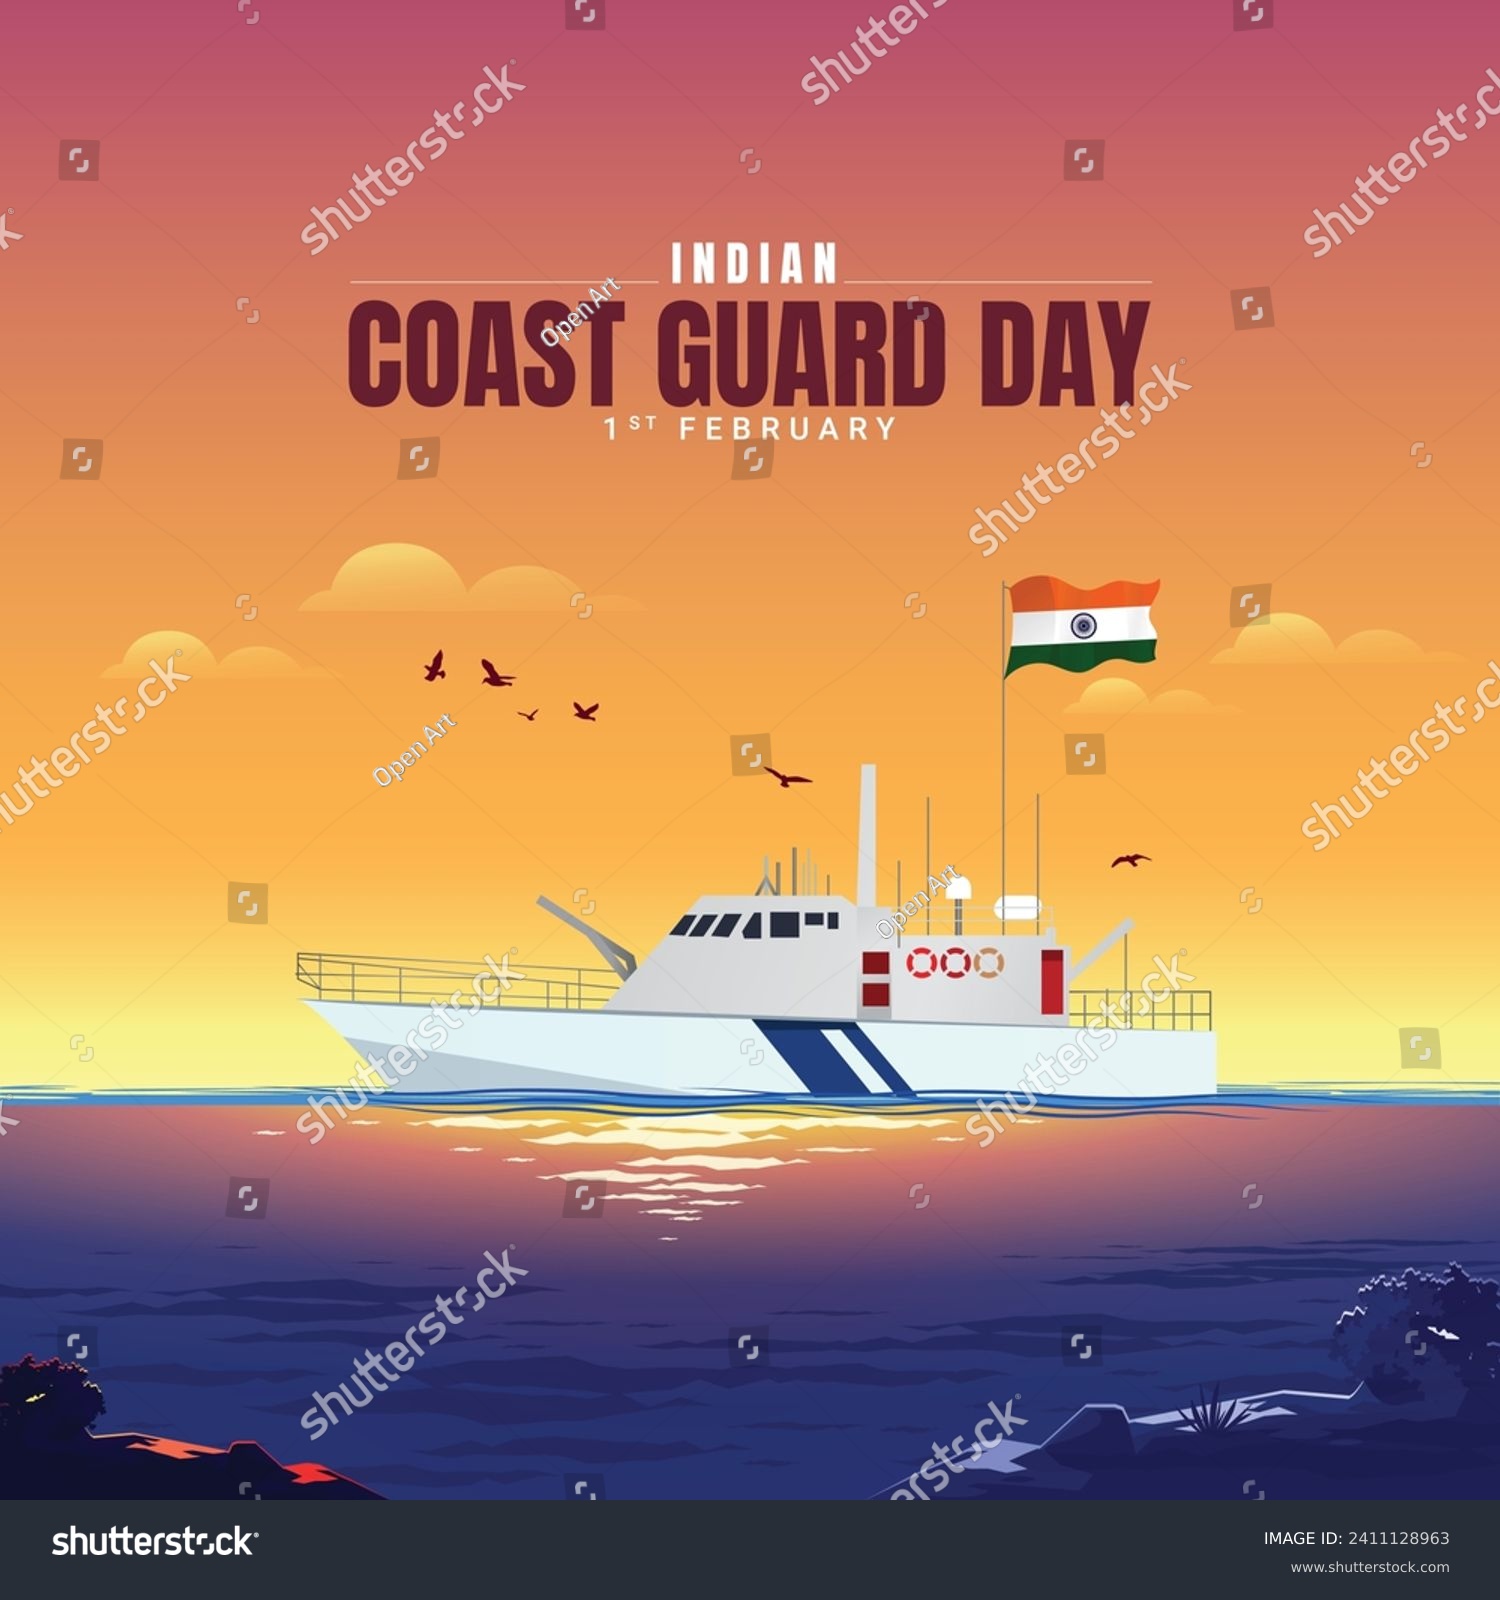 Indian Coast Guard Day is observed on 1 February every year to honor the important role that the organization plays Editable Vector Illustration, Indian Coast Guard patrolling surveillance boats #2411128963